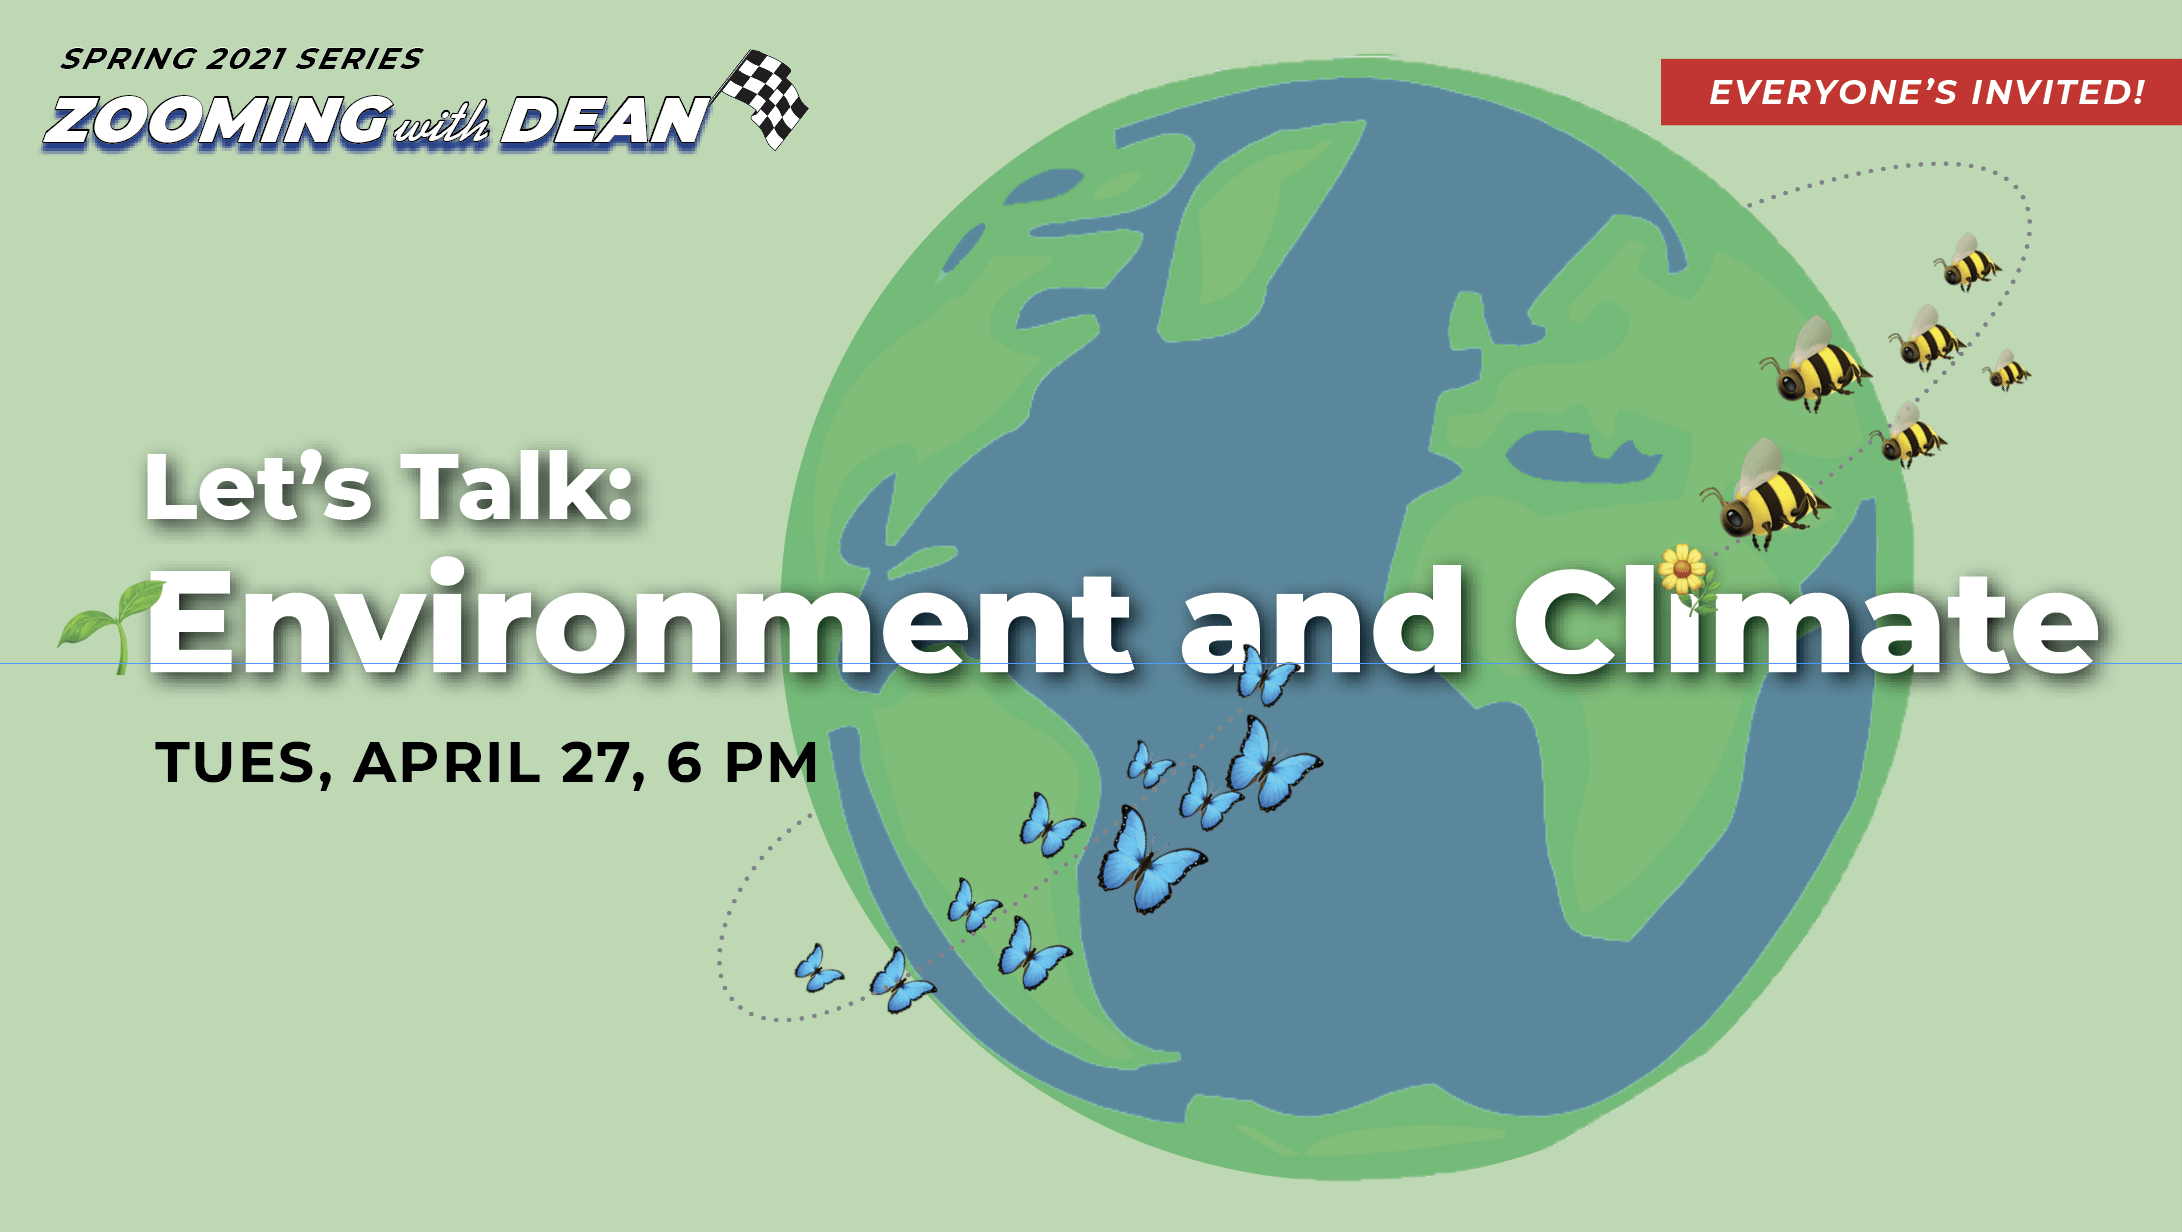 Zooming with Dean event: Let's talk environment and climate